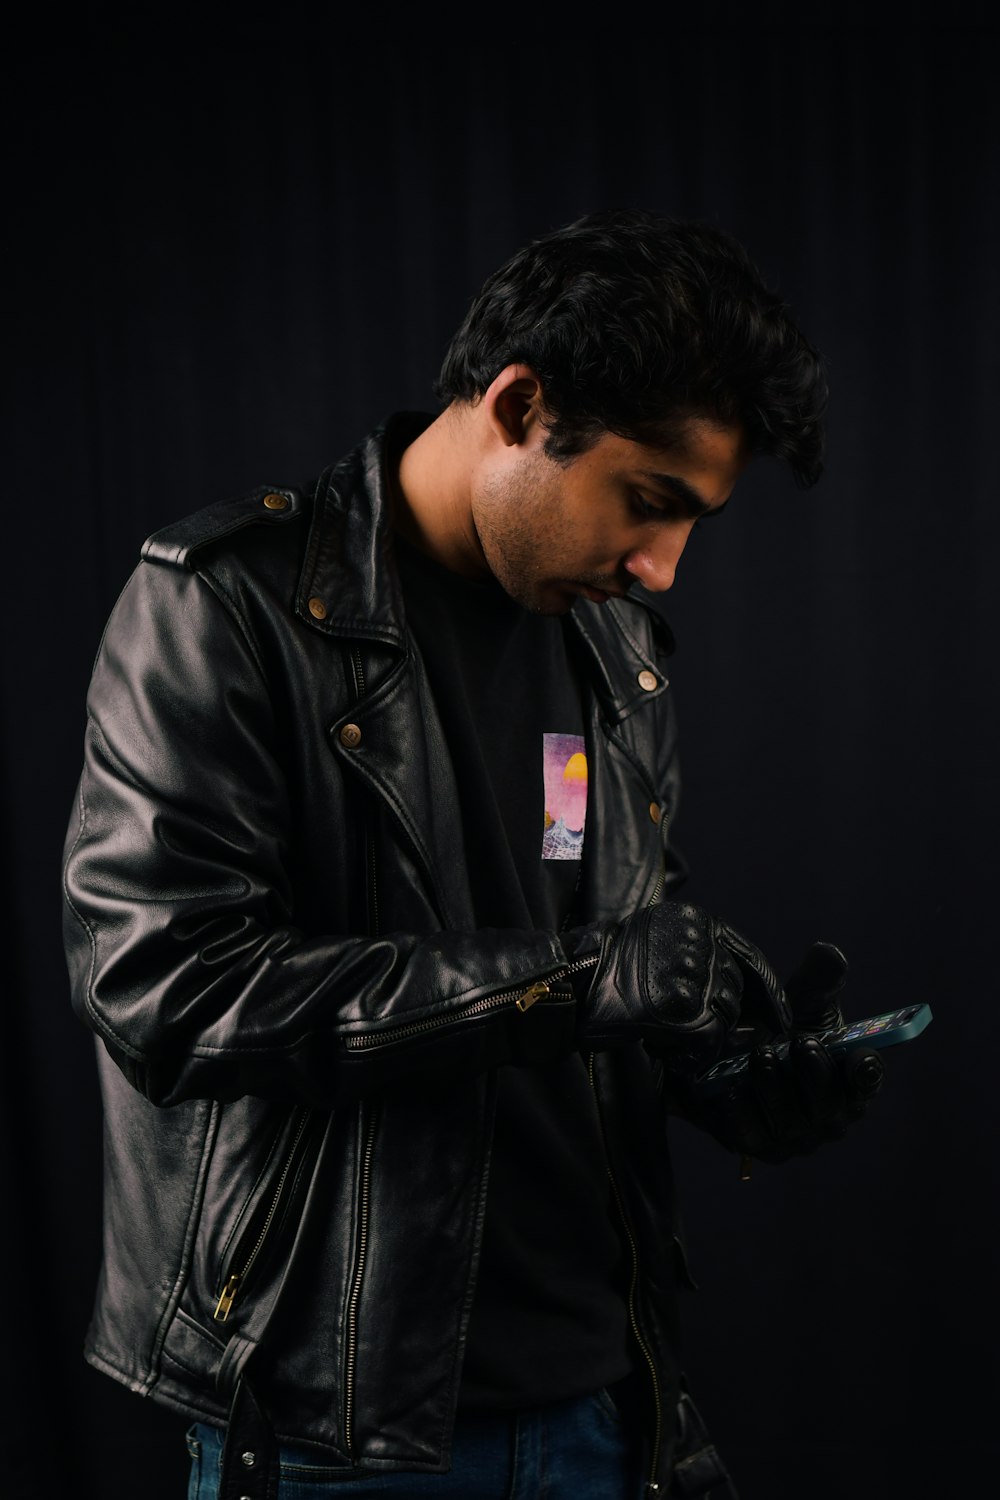 a man in a black leather jacket holding a cell phone